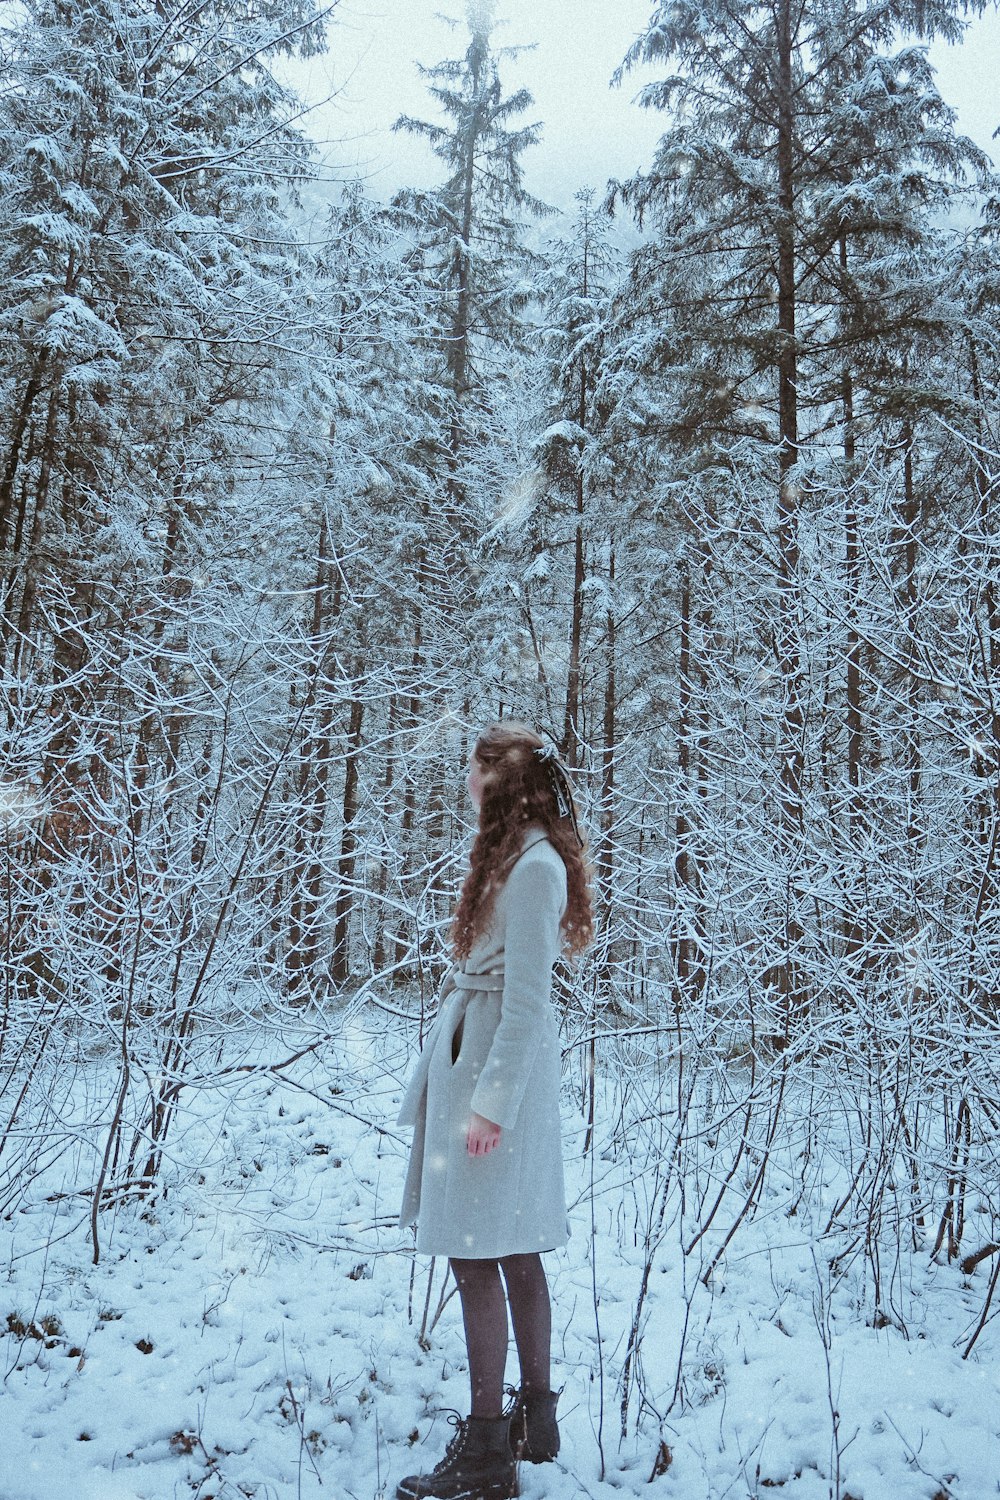 woman in white dress standing on snow covered ground surrounded by trees during daytime